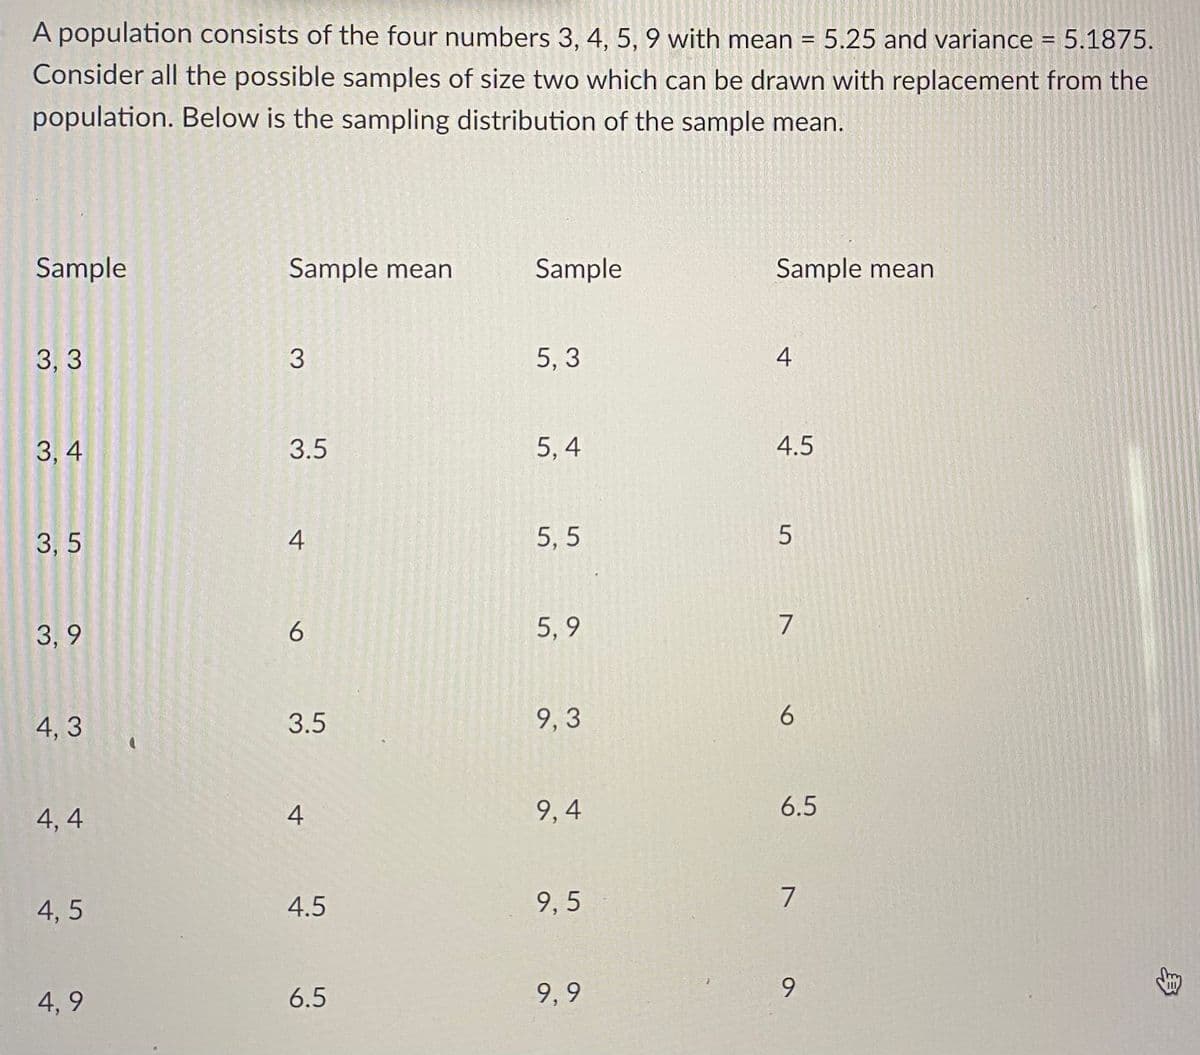 A population consists of the four numbers 3, 4, 5, 9 with mean = 5.25 and variance = 5.1875.
Consider all the possible samples of size two which can be drawn with replacement from the
population. Below is the sampling distribution of the sample mean.
Sample
Sample mean
Sample
Sample mean
3, 3
3
5,3
4
3,4
3.5
5,4
4.5
3,5
4
5, 5
5
3,9
5,9
7
4, 3
9,3
6
4,4
9,4
6.5
4,5
7
9,5
4,9
9
9,9
6
3.5
4
4.5
6.5